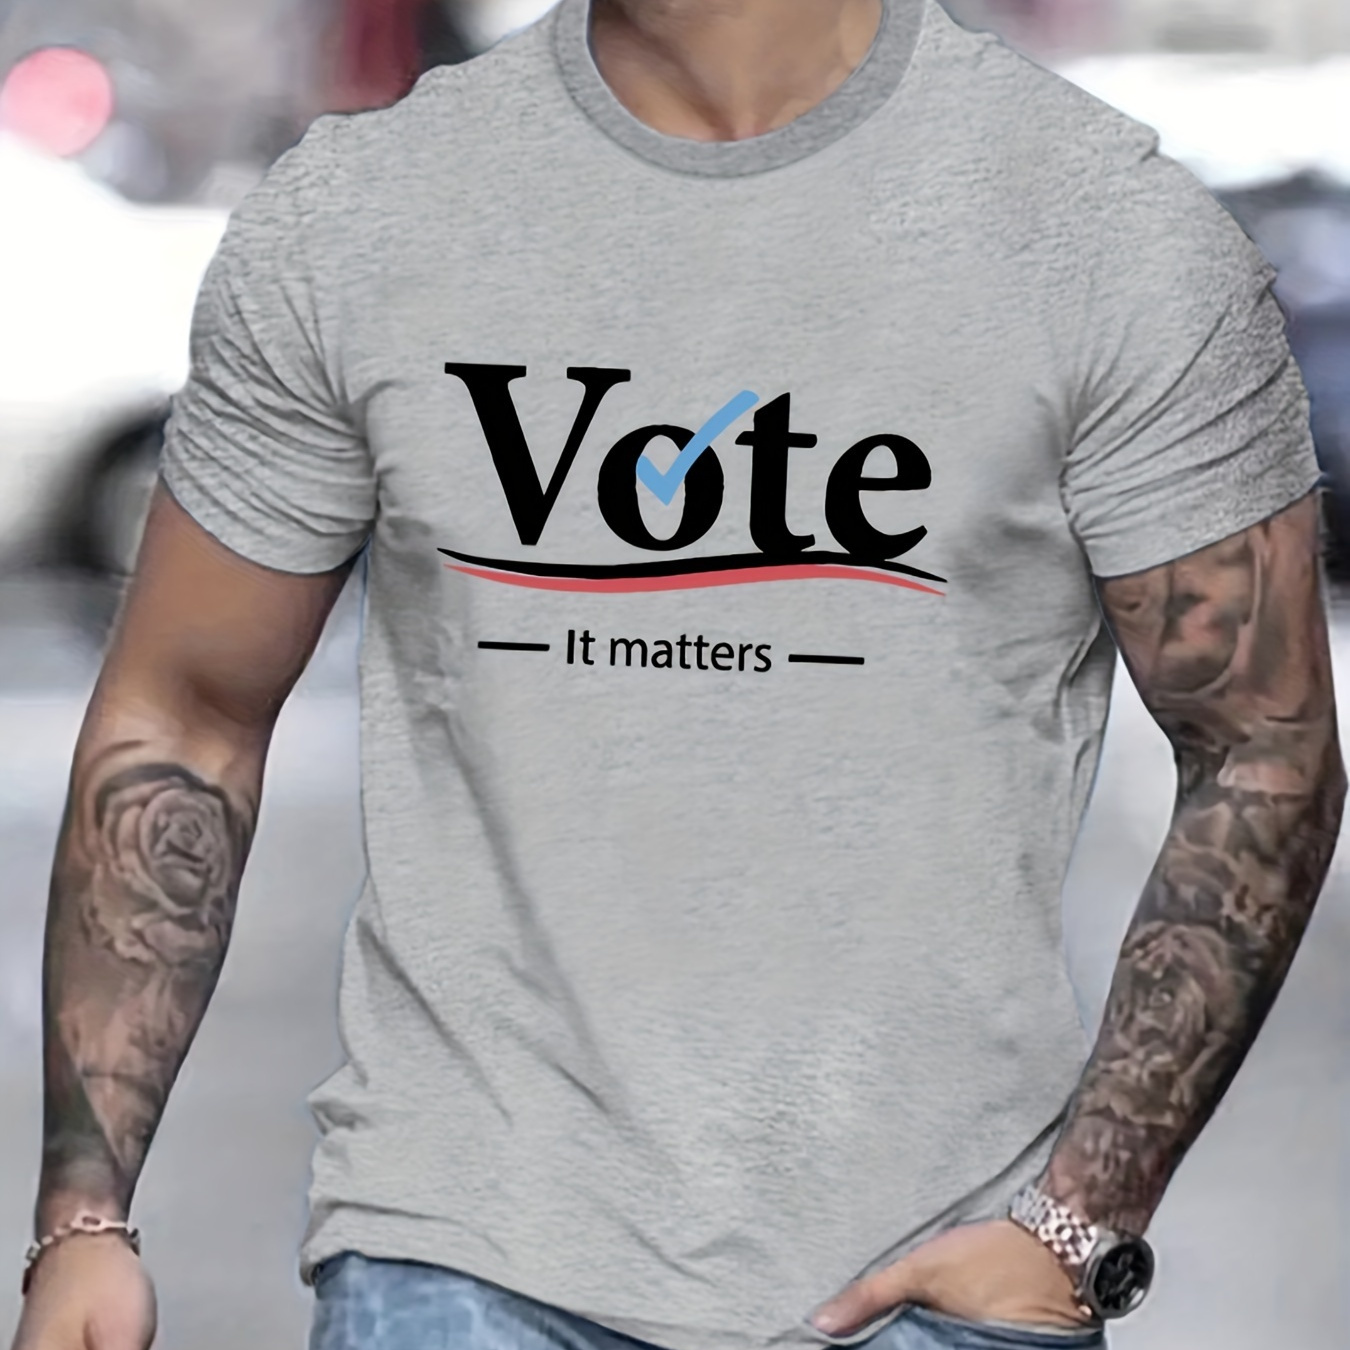 

Vote Print T Shirt, Tees For Men, Casual Short Sleeve T-shirt For Summer